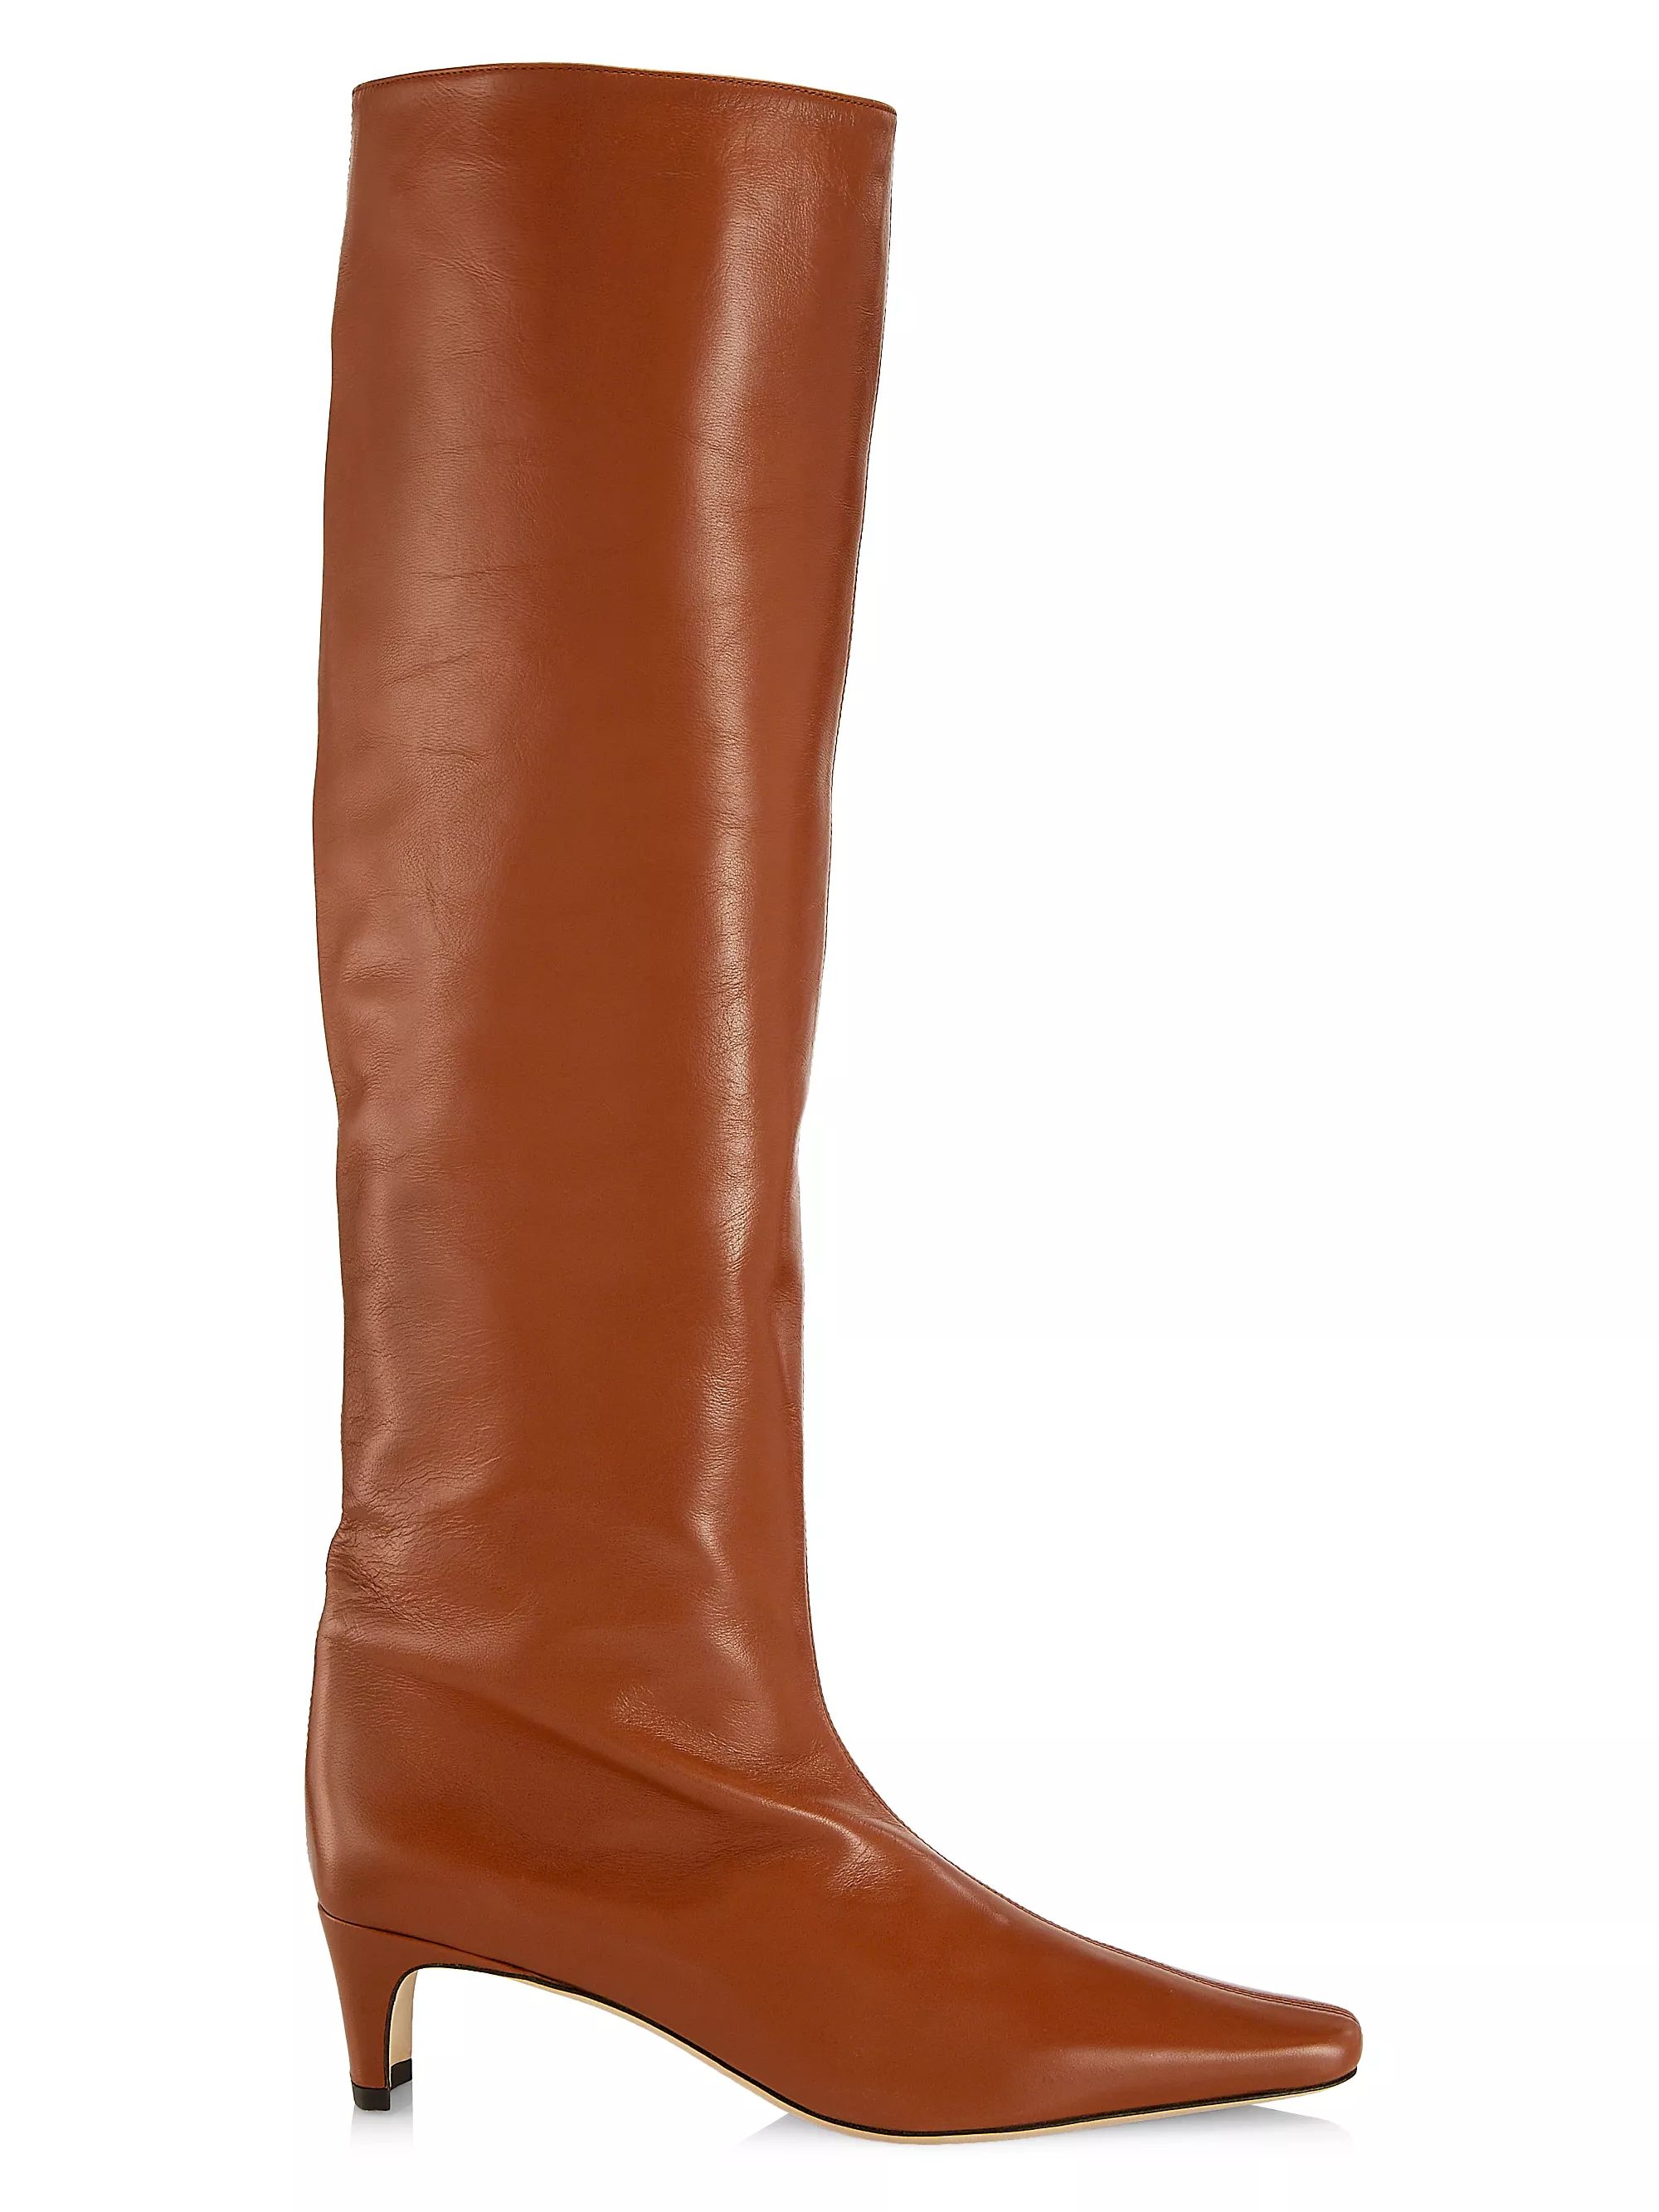 Wally Leather Knee-High Boots | Saks Fifth Avenue